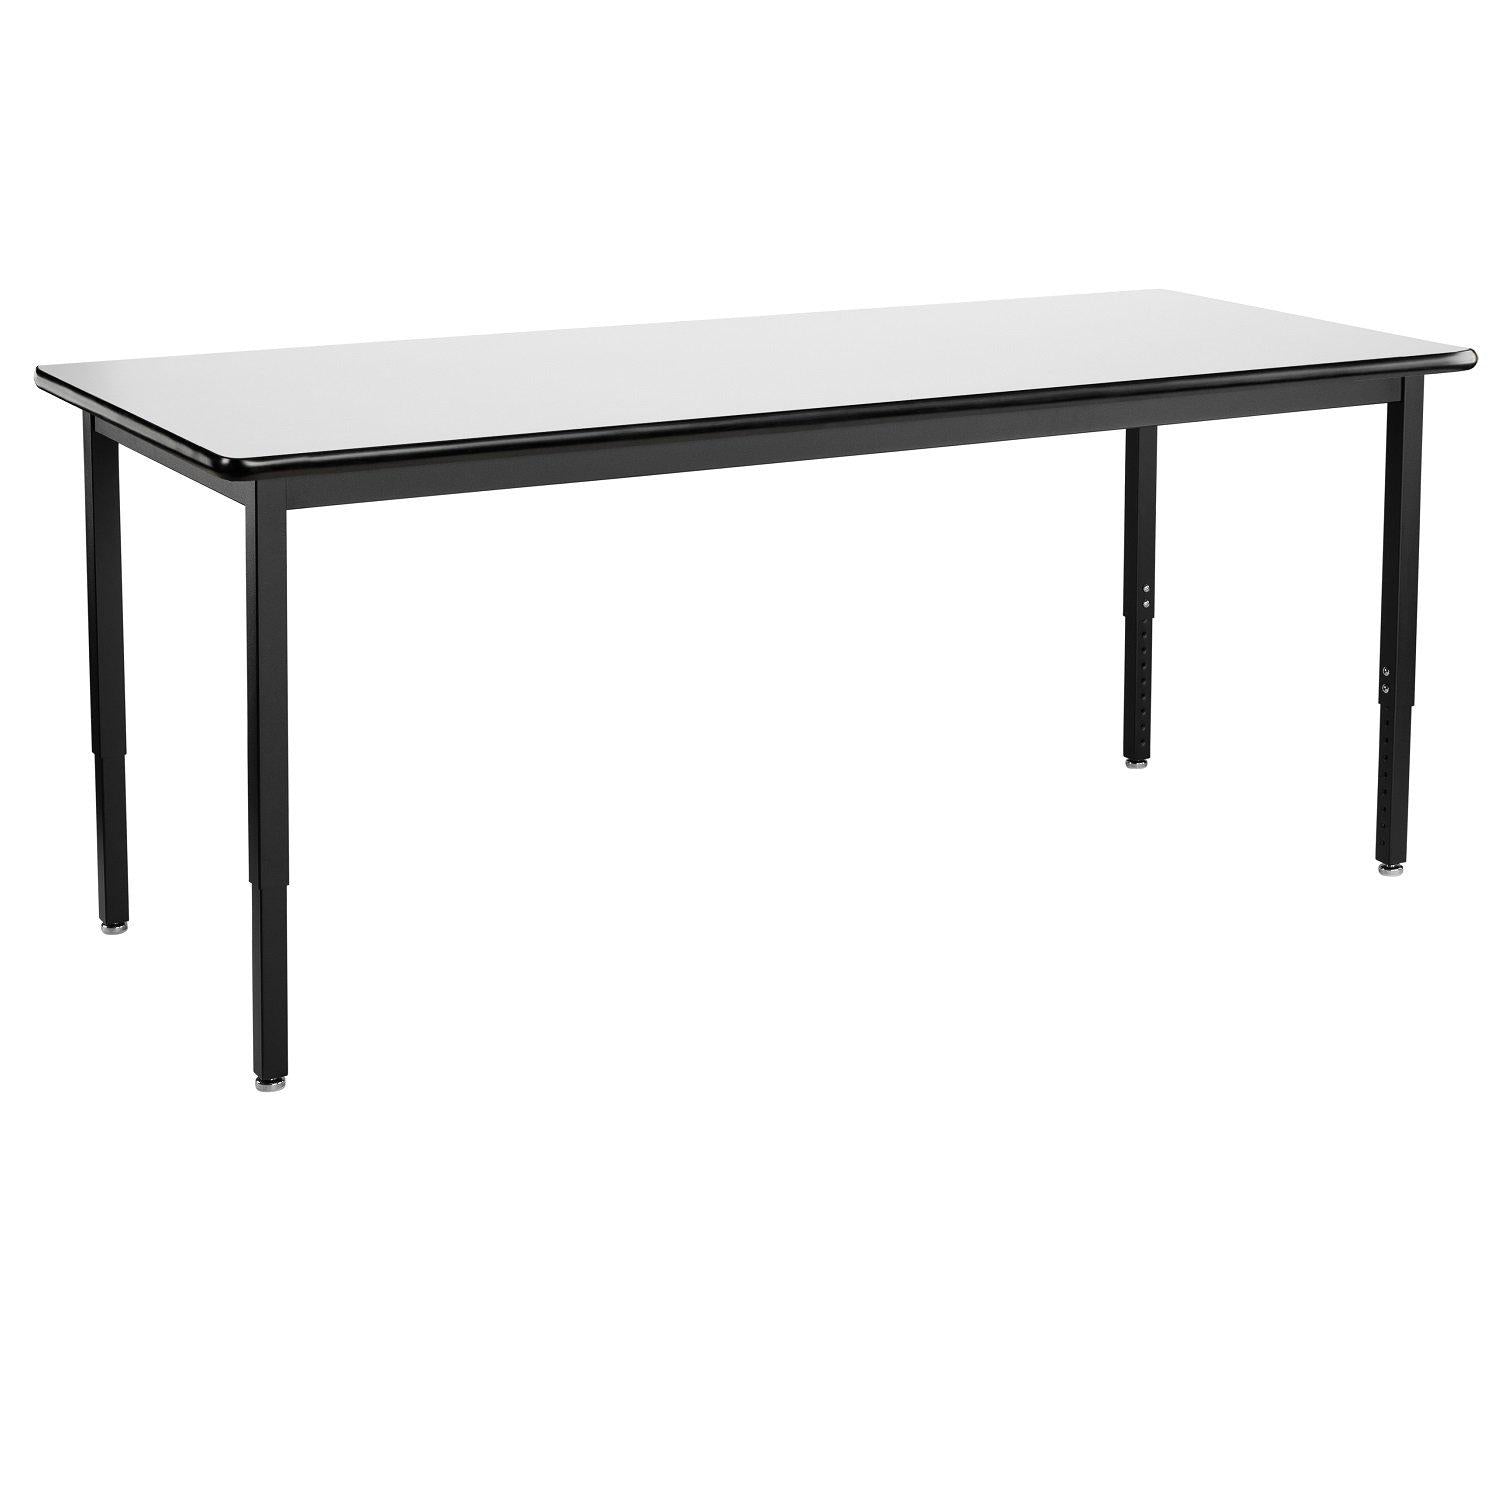 Heavy-Duty Height-Adjustable Utility Table, Black Frame, 24" x 72", Whiteboard High-Pressure Laminate Top